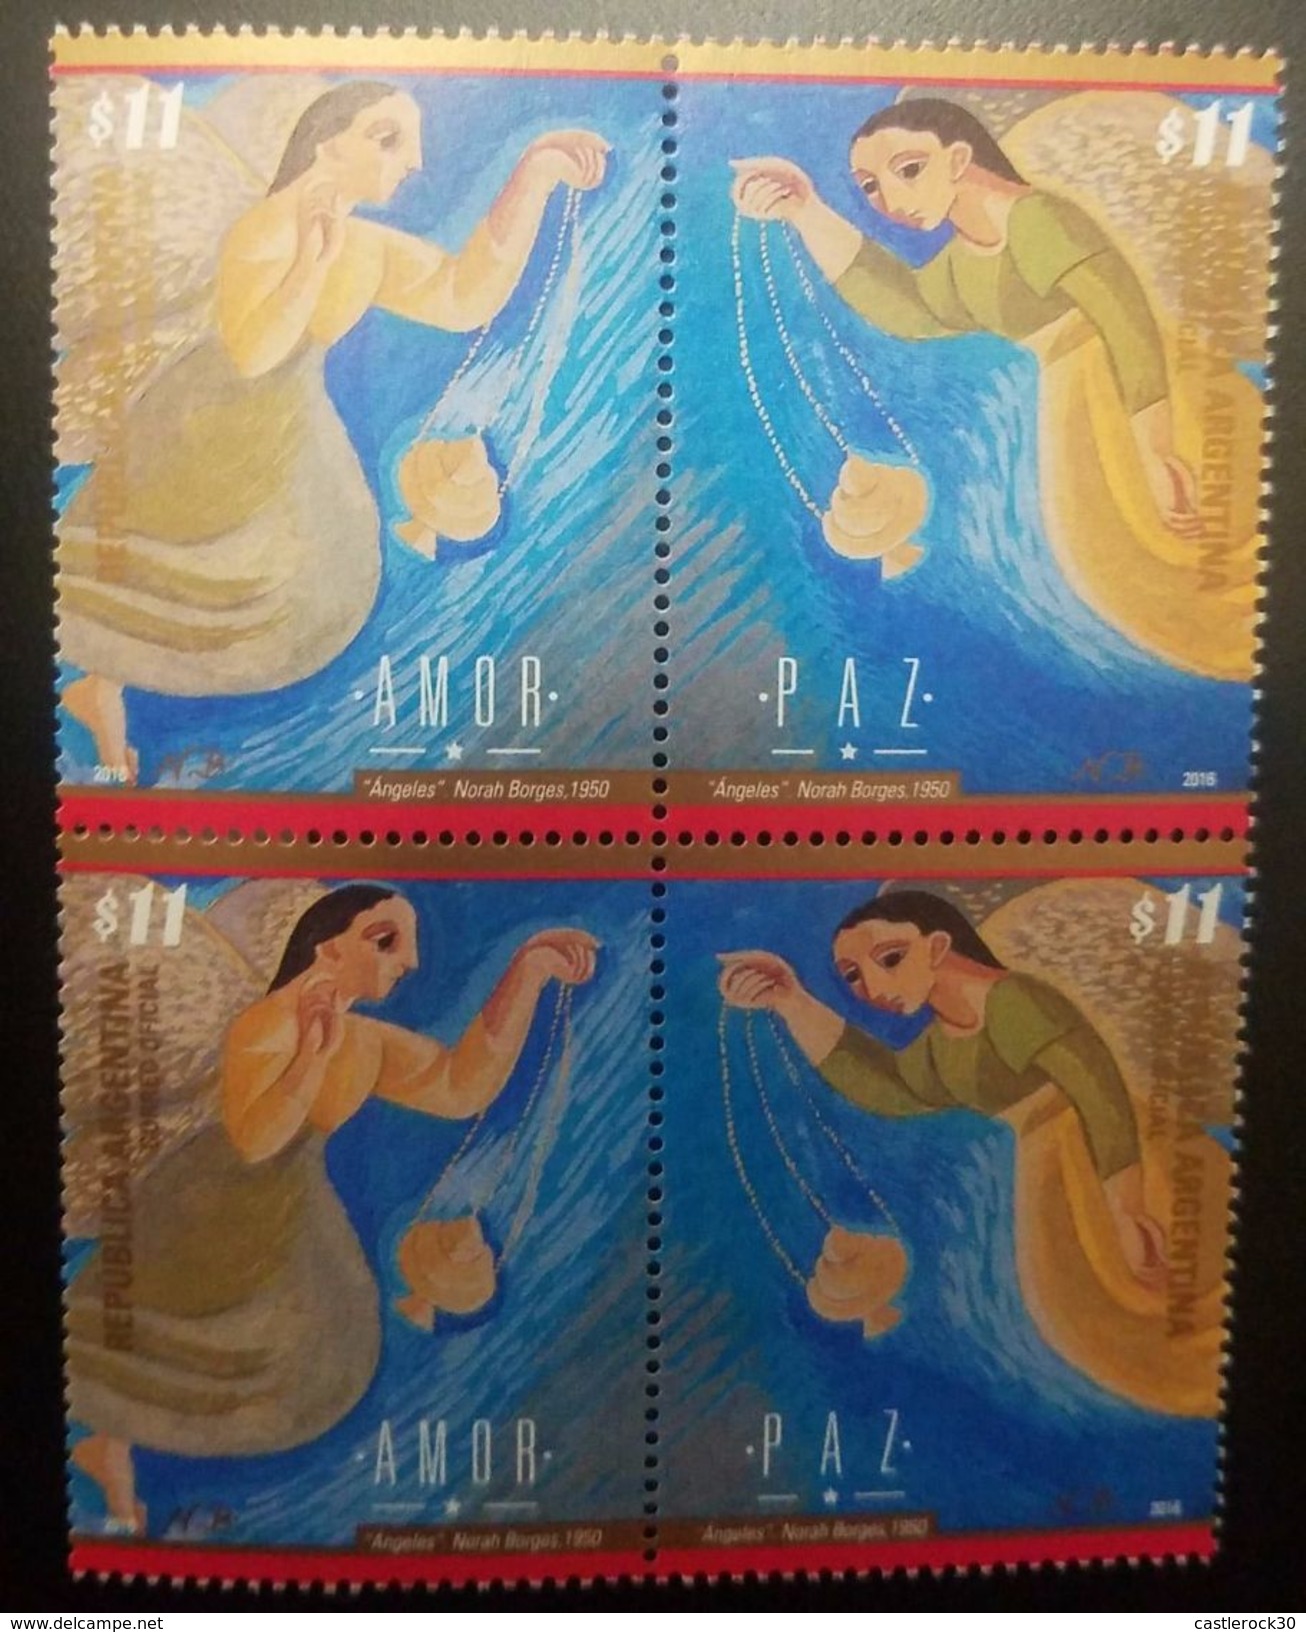 L) 2016 ARGENTINA, CHRISTMAS, ANGELS, LOVE, PEACE, FULL COLORS, BLOCK OF 4, MNH, XF - Unused Stamps